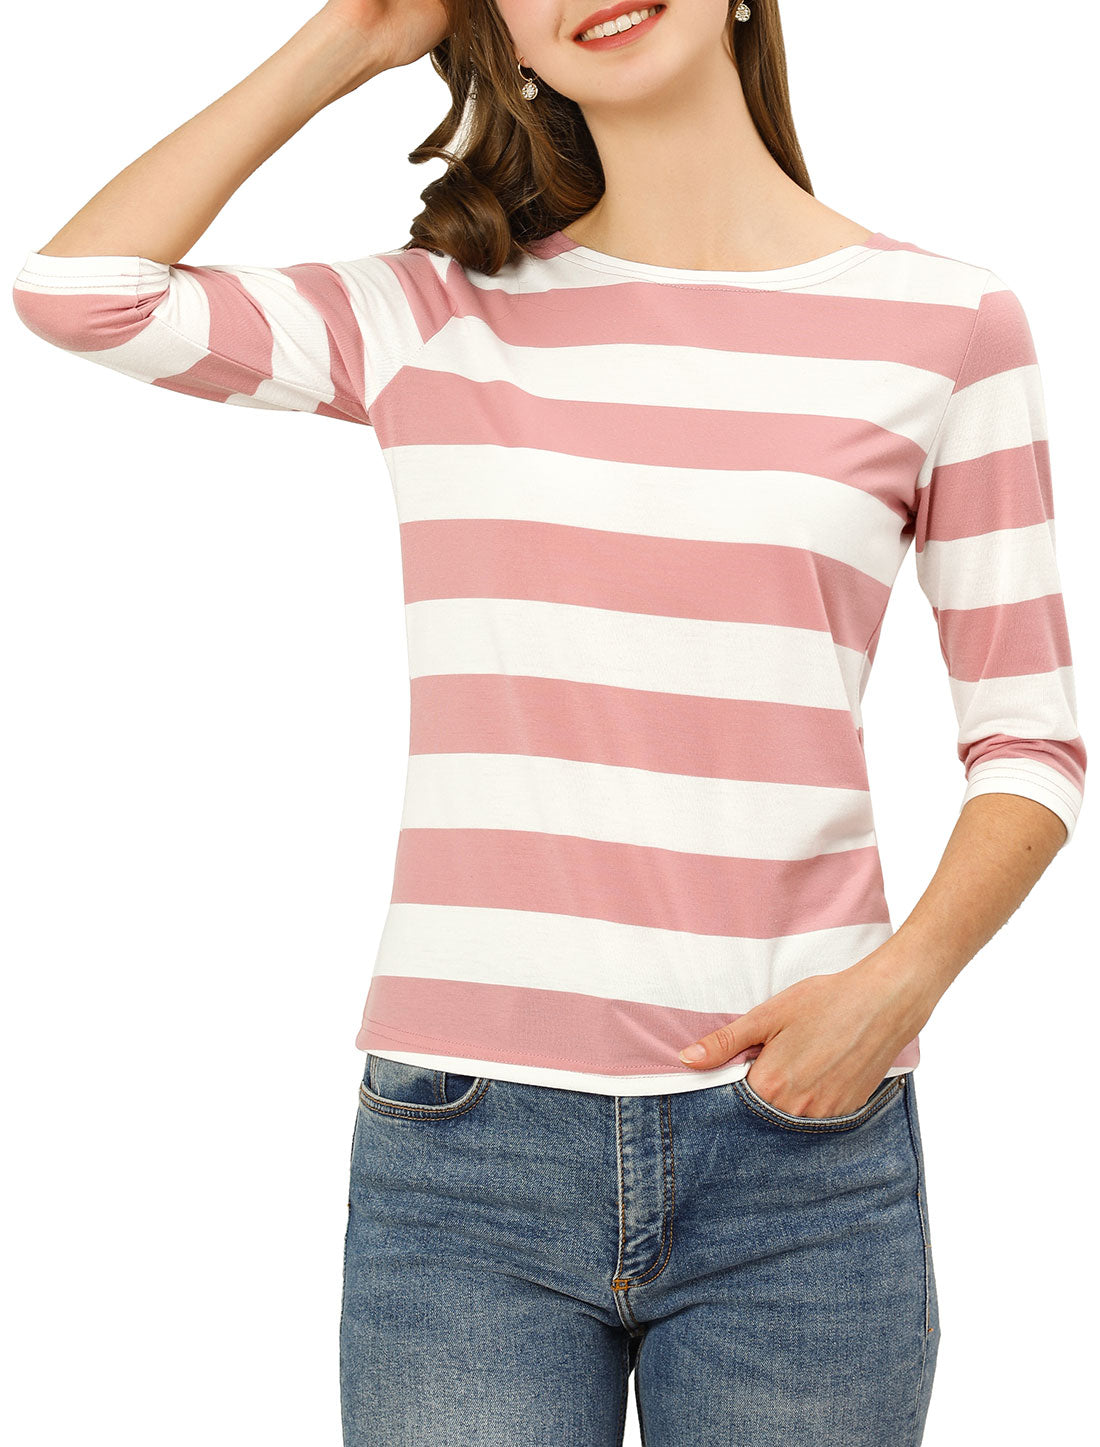 Allegra K Striped Elbow Sleeve Casual Basic Boat Neck T-shirt